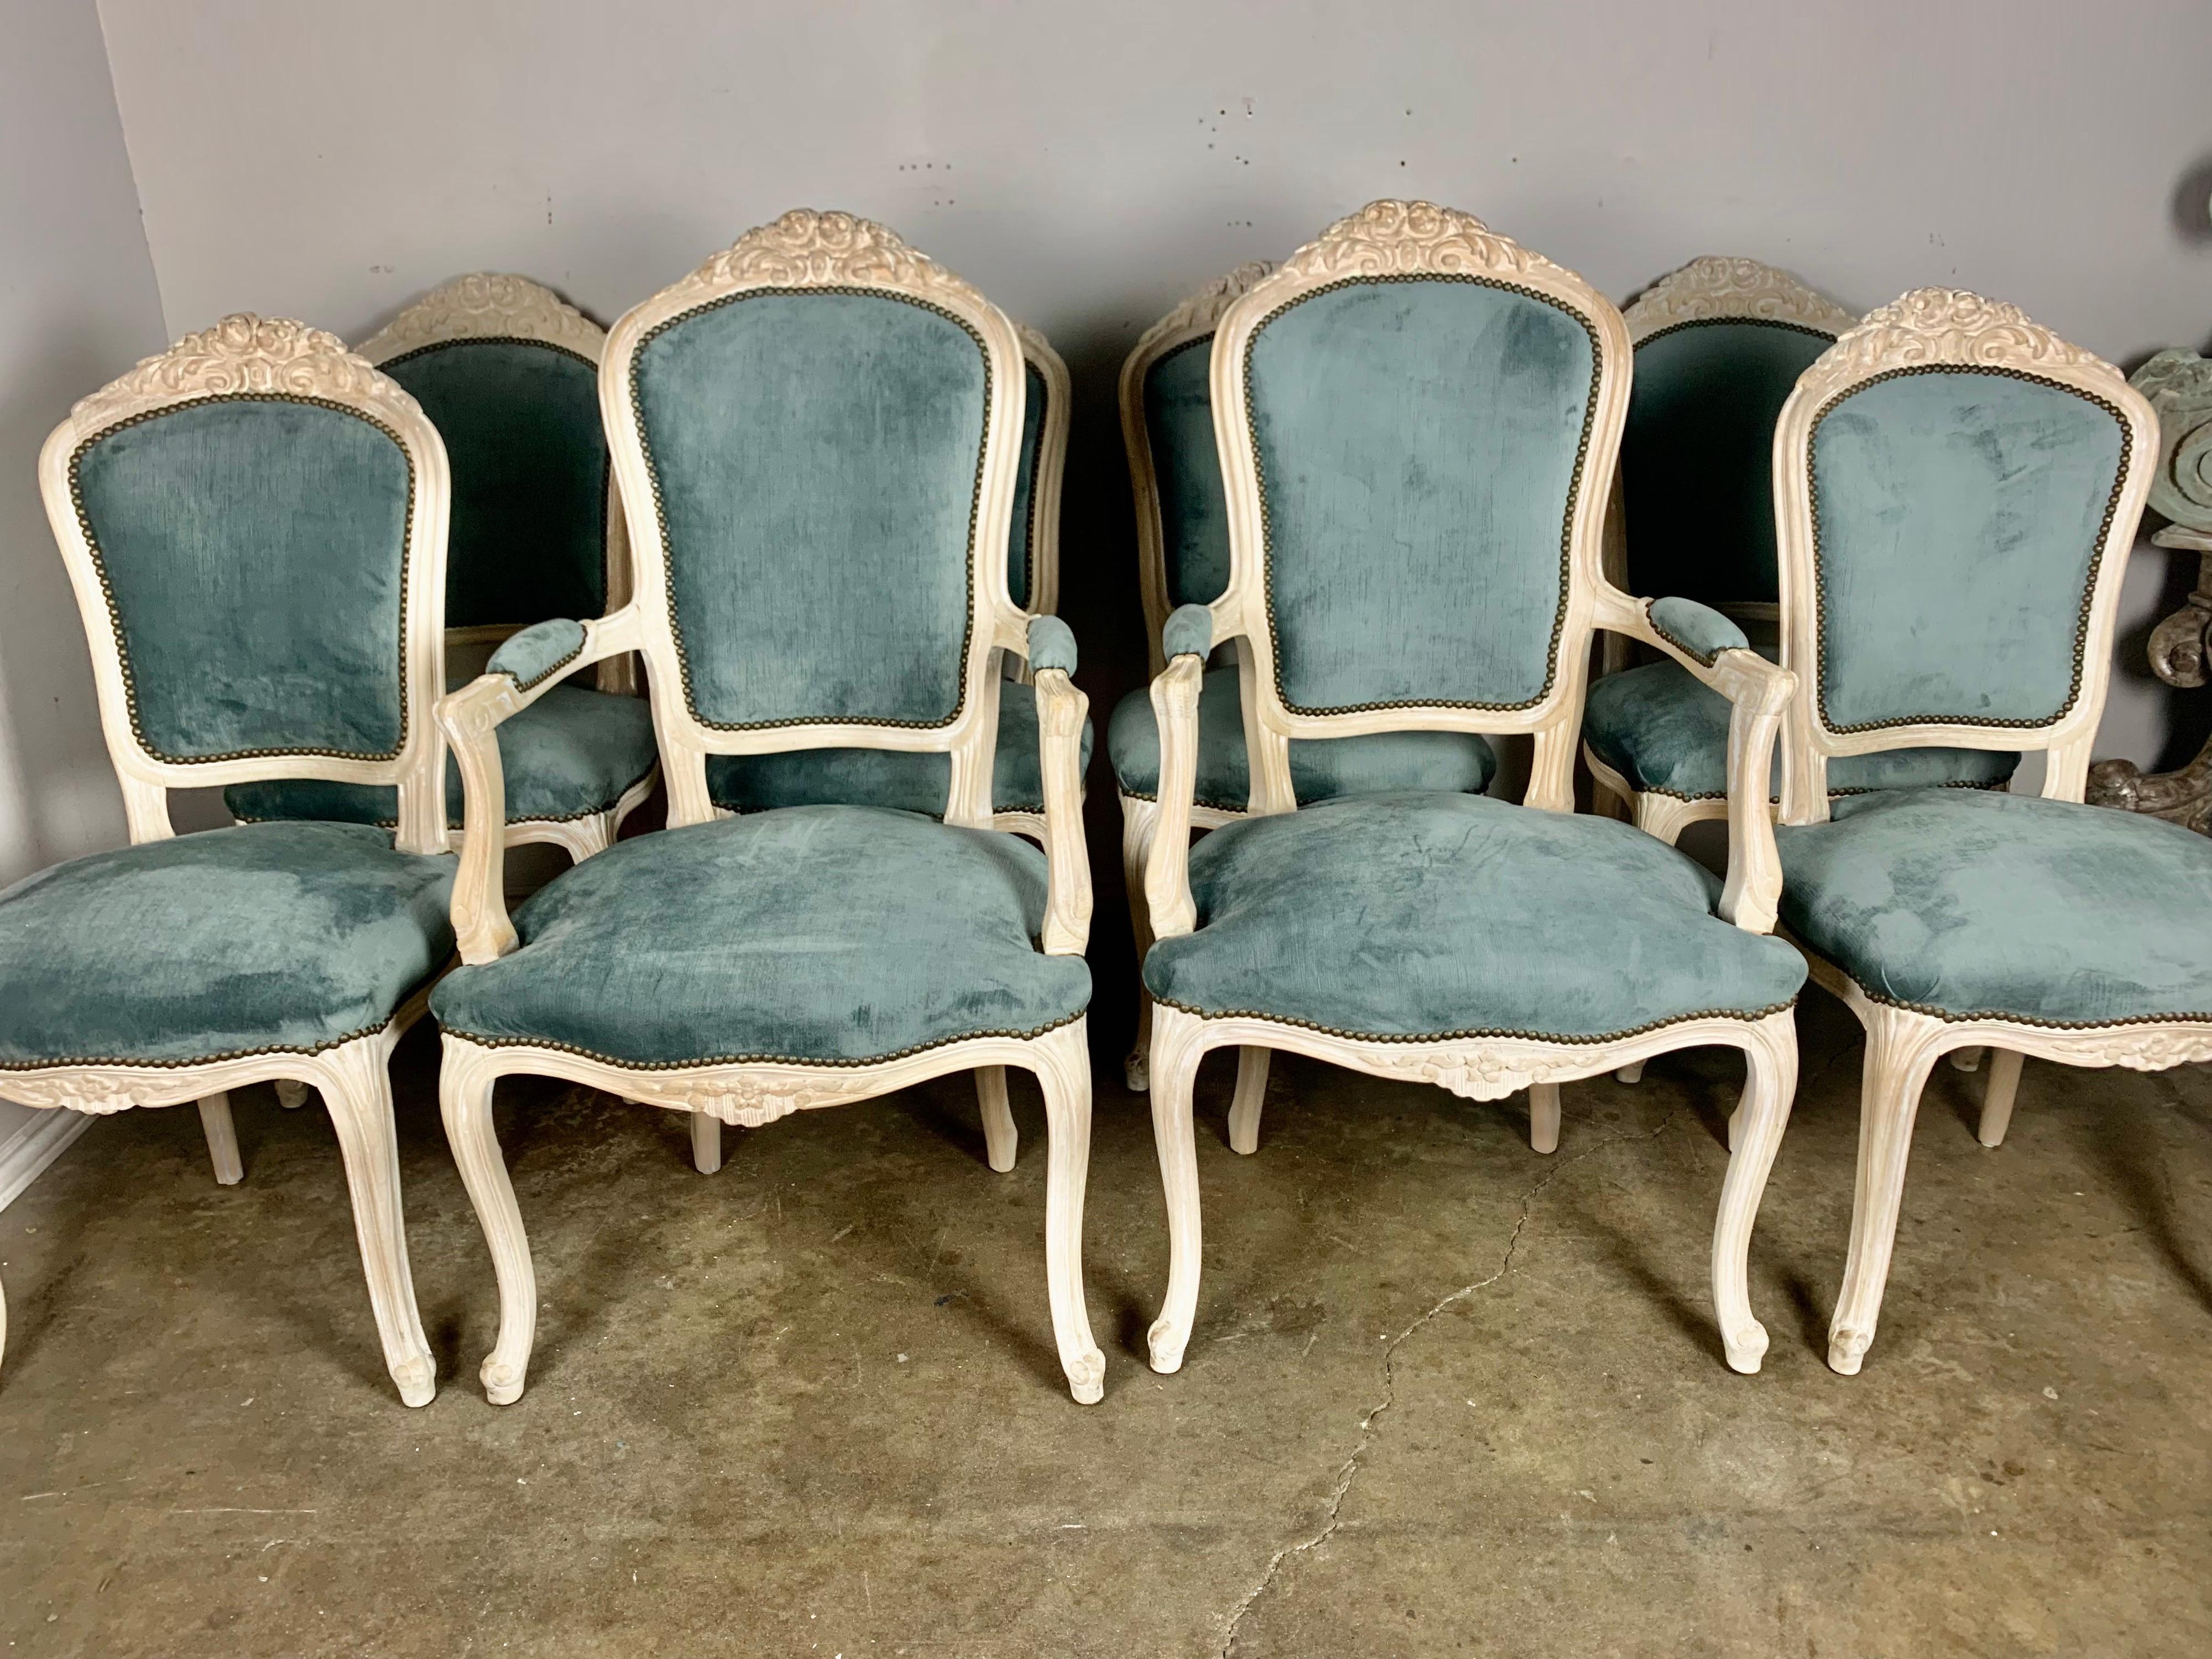 Set of eight bleached walnut Louis XV style dining chairs with carved roses and flowers throughout. The chairs have beautiful oval shaped backs and stand on four cabriole legs with rams head feet. They are newly upholstered in a steel blue colored